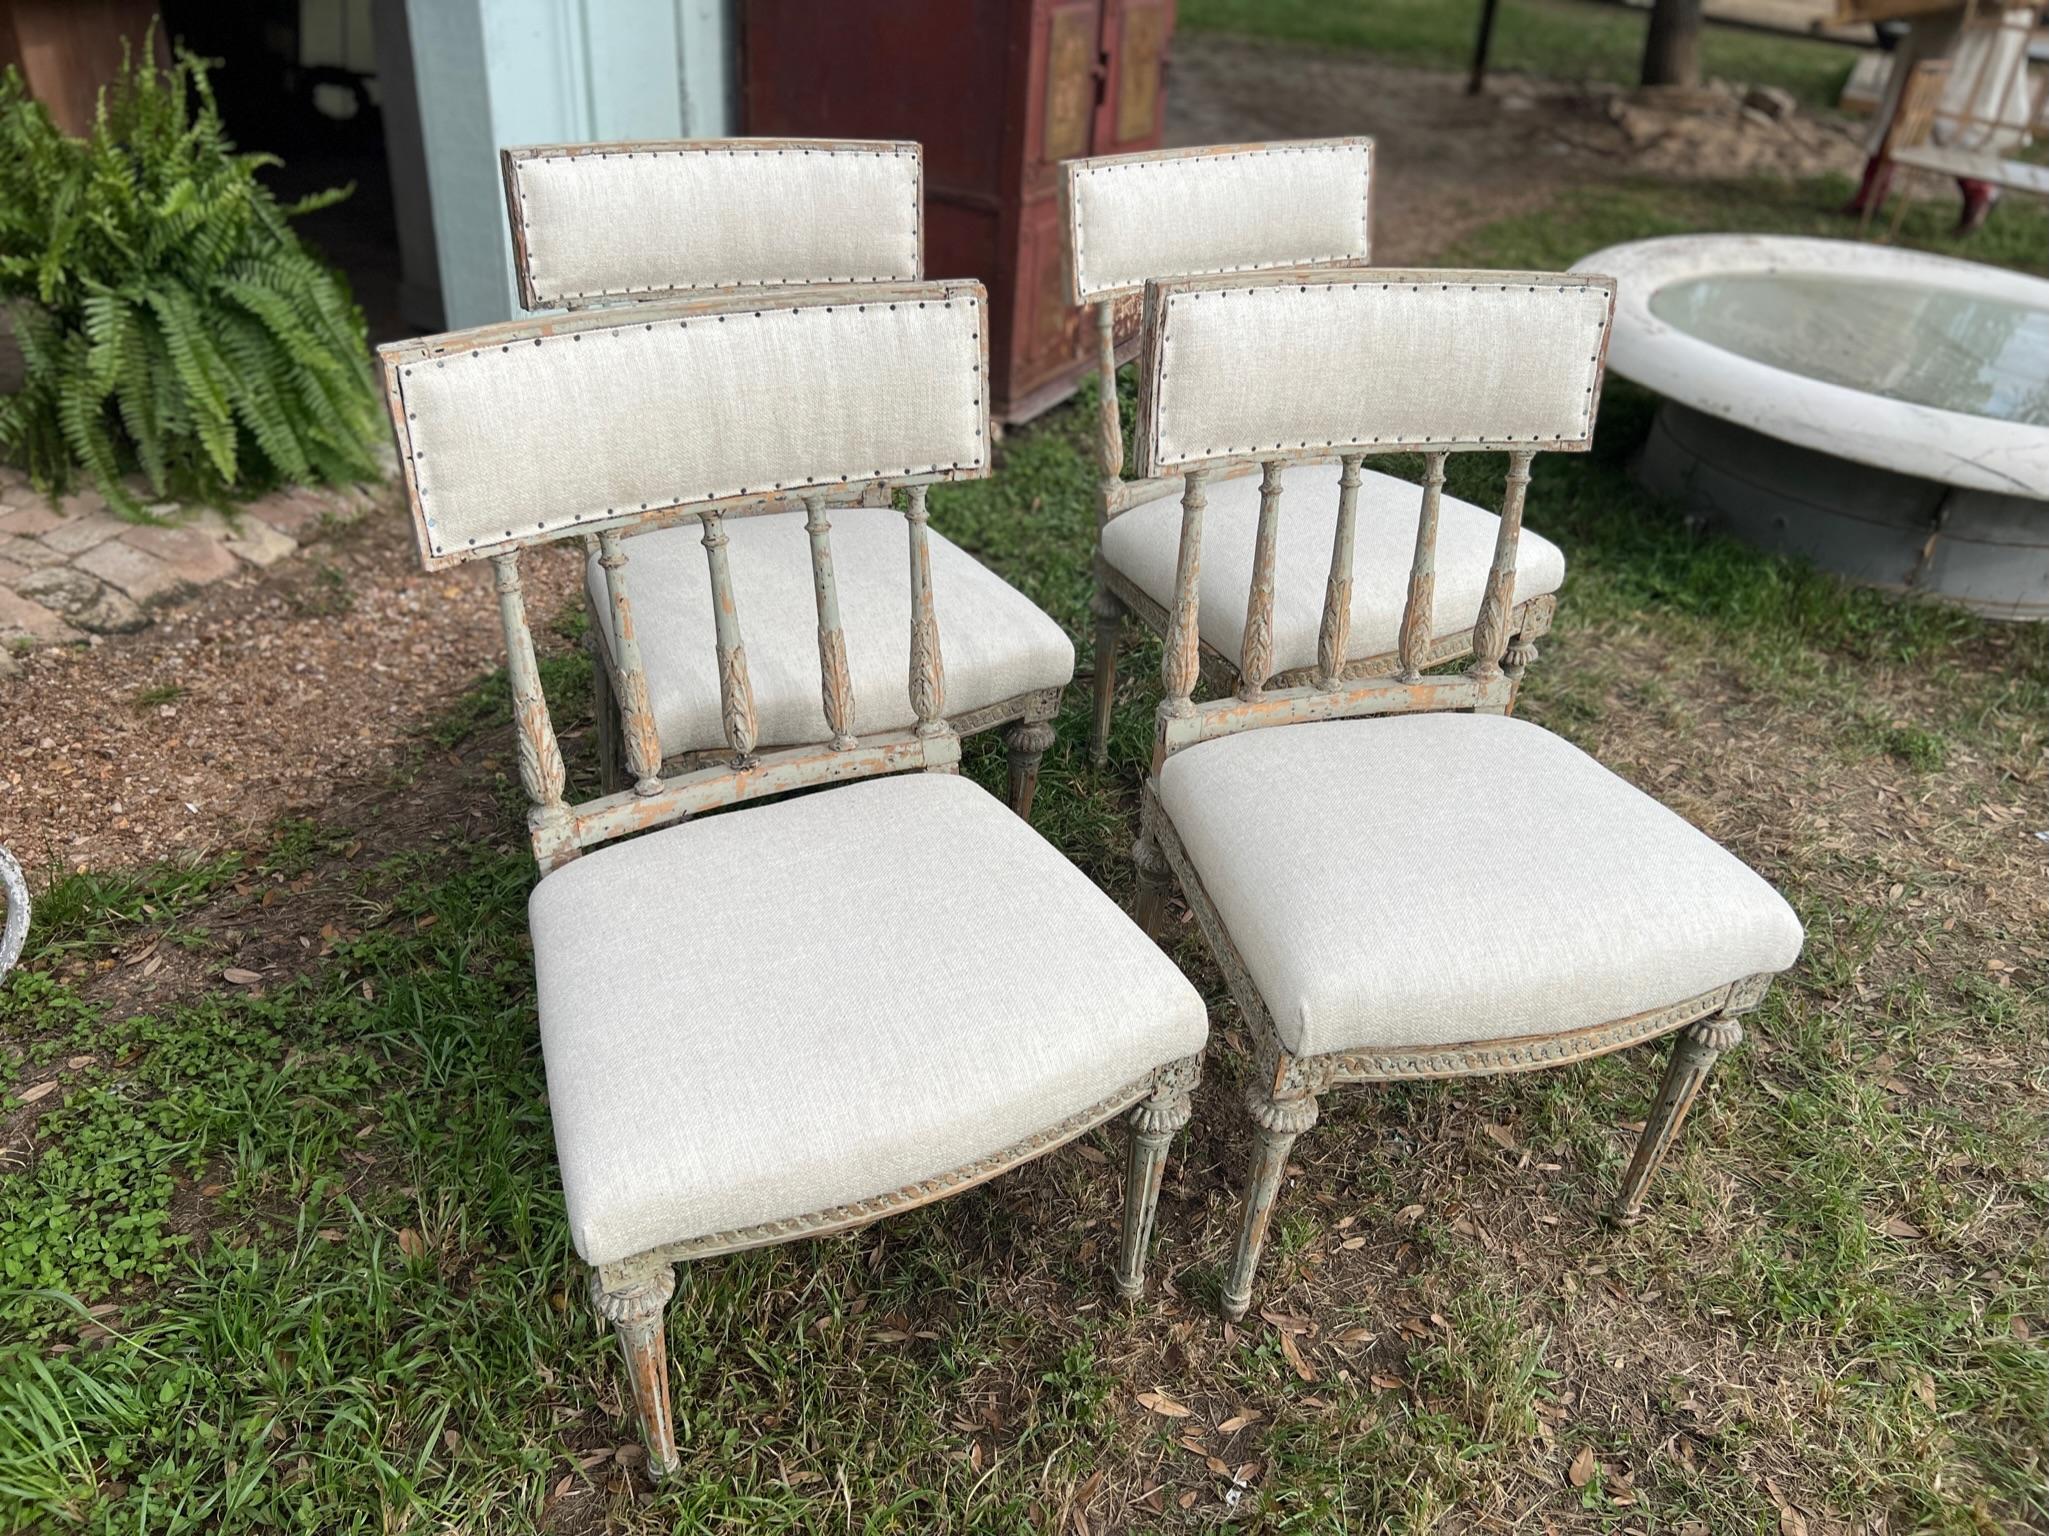 Absolutely stunning set of 4 large 18th century Gustavian dining chairs reupholstered in a beautiful Crypton fabric. These have been carefully dry scrapped uncovering the most fantastic shades of patina coming through with revealing a beautiful